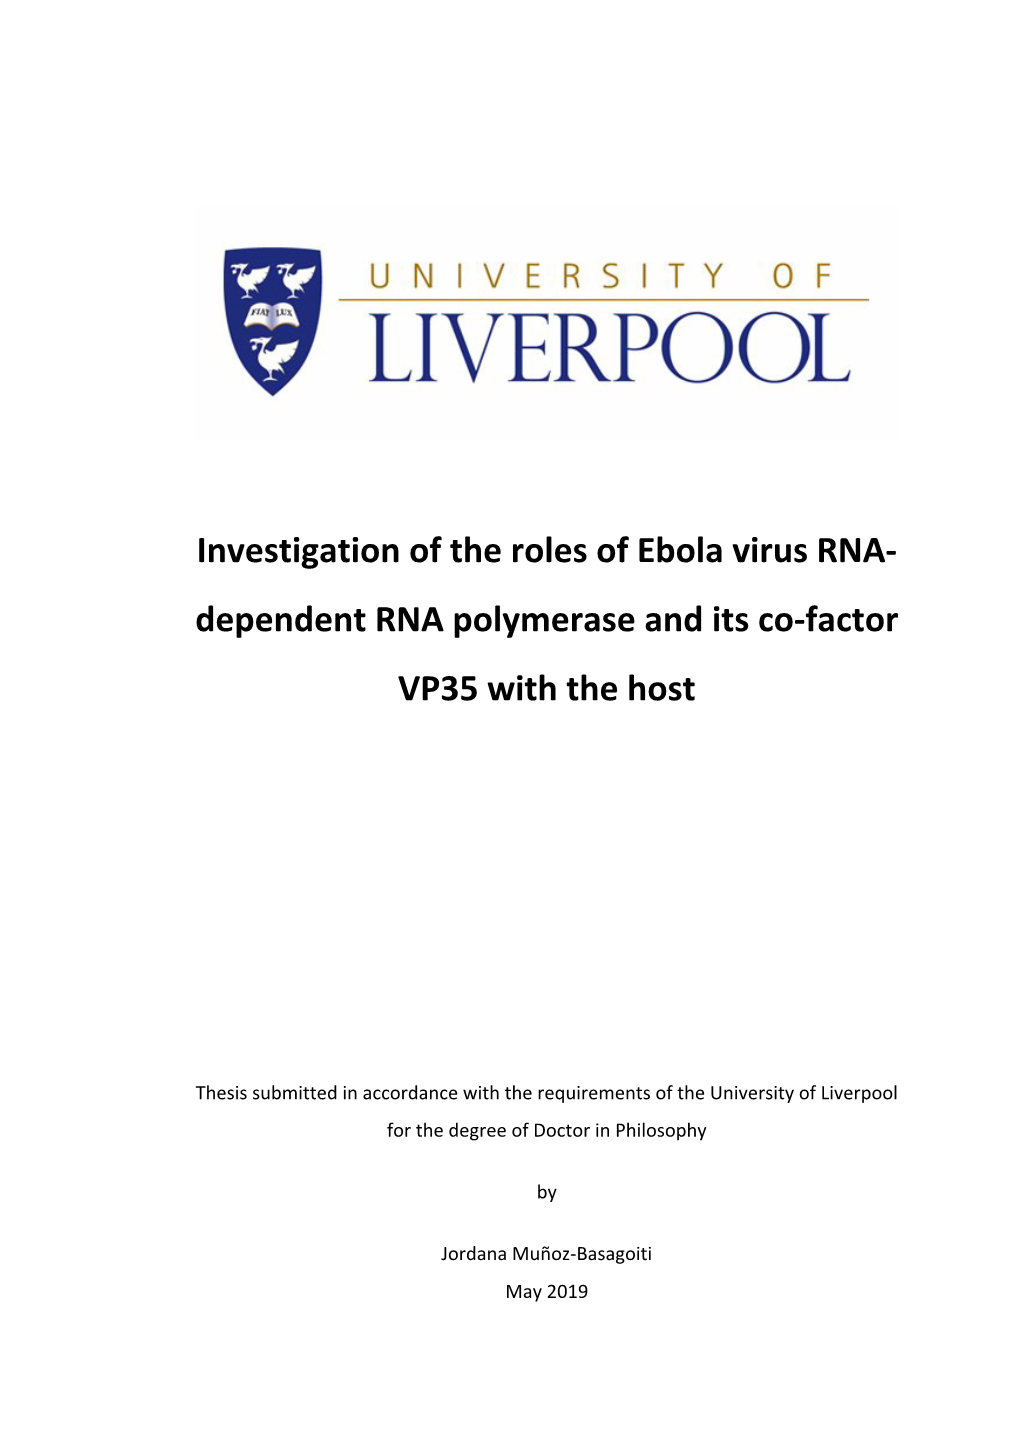 Investigation of the Roles of Ebola Virus RNA- Dependent RNA Polymerase and Its Co-Factor VP35 with the Host